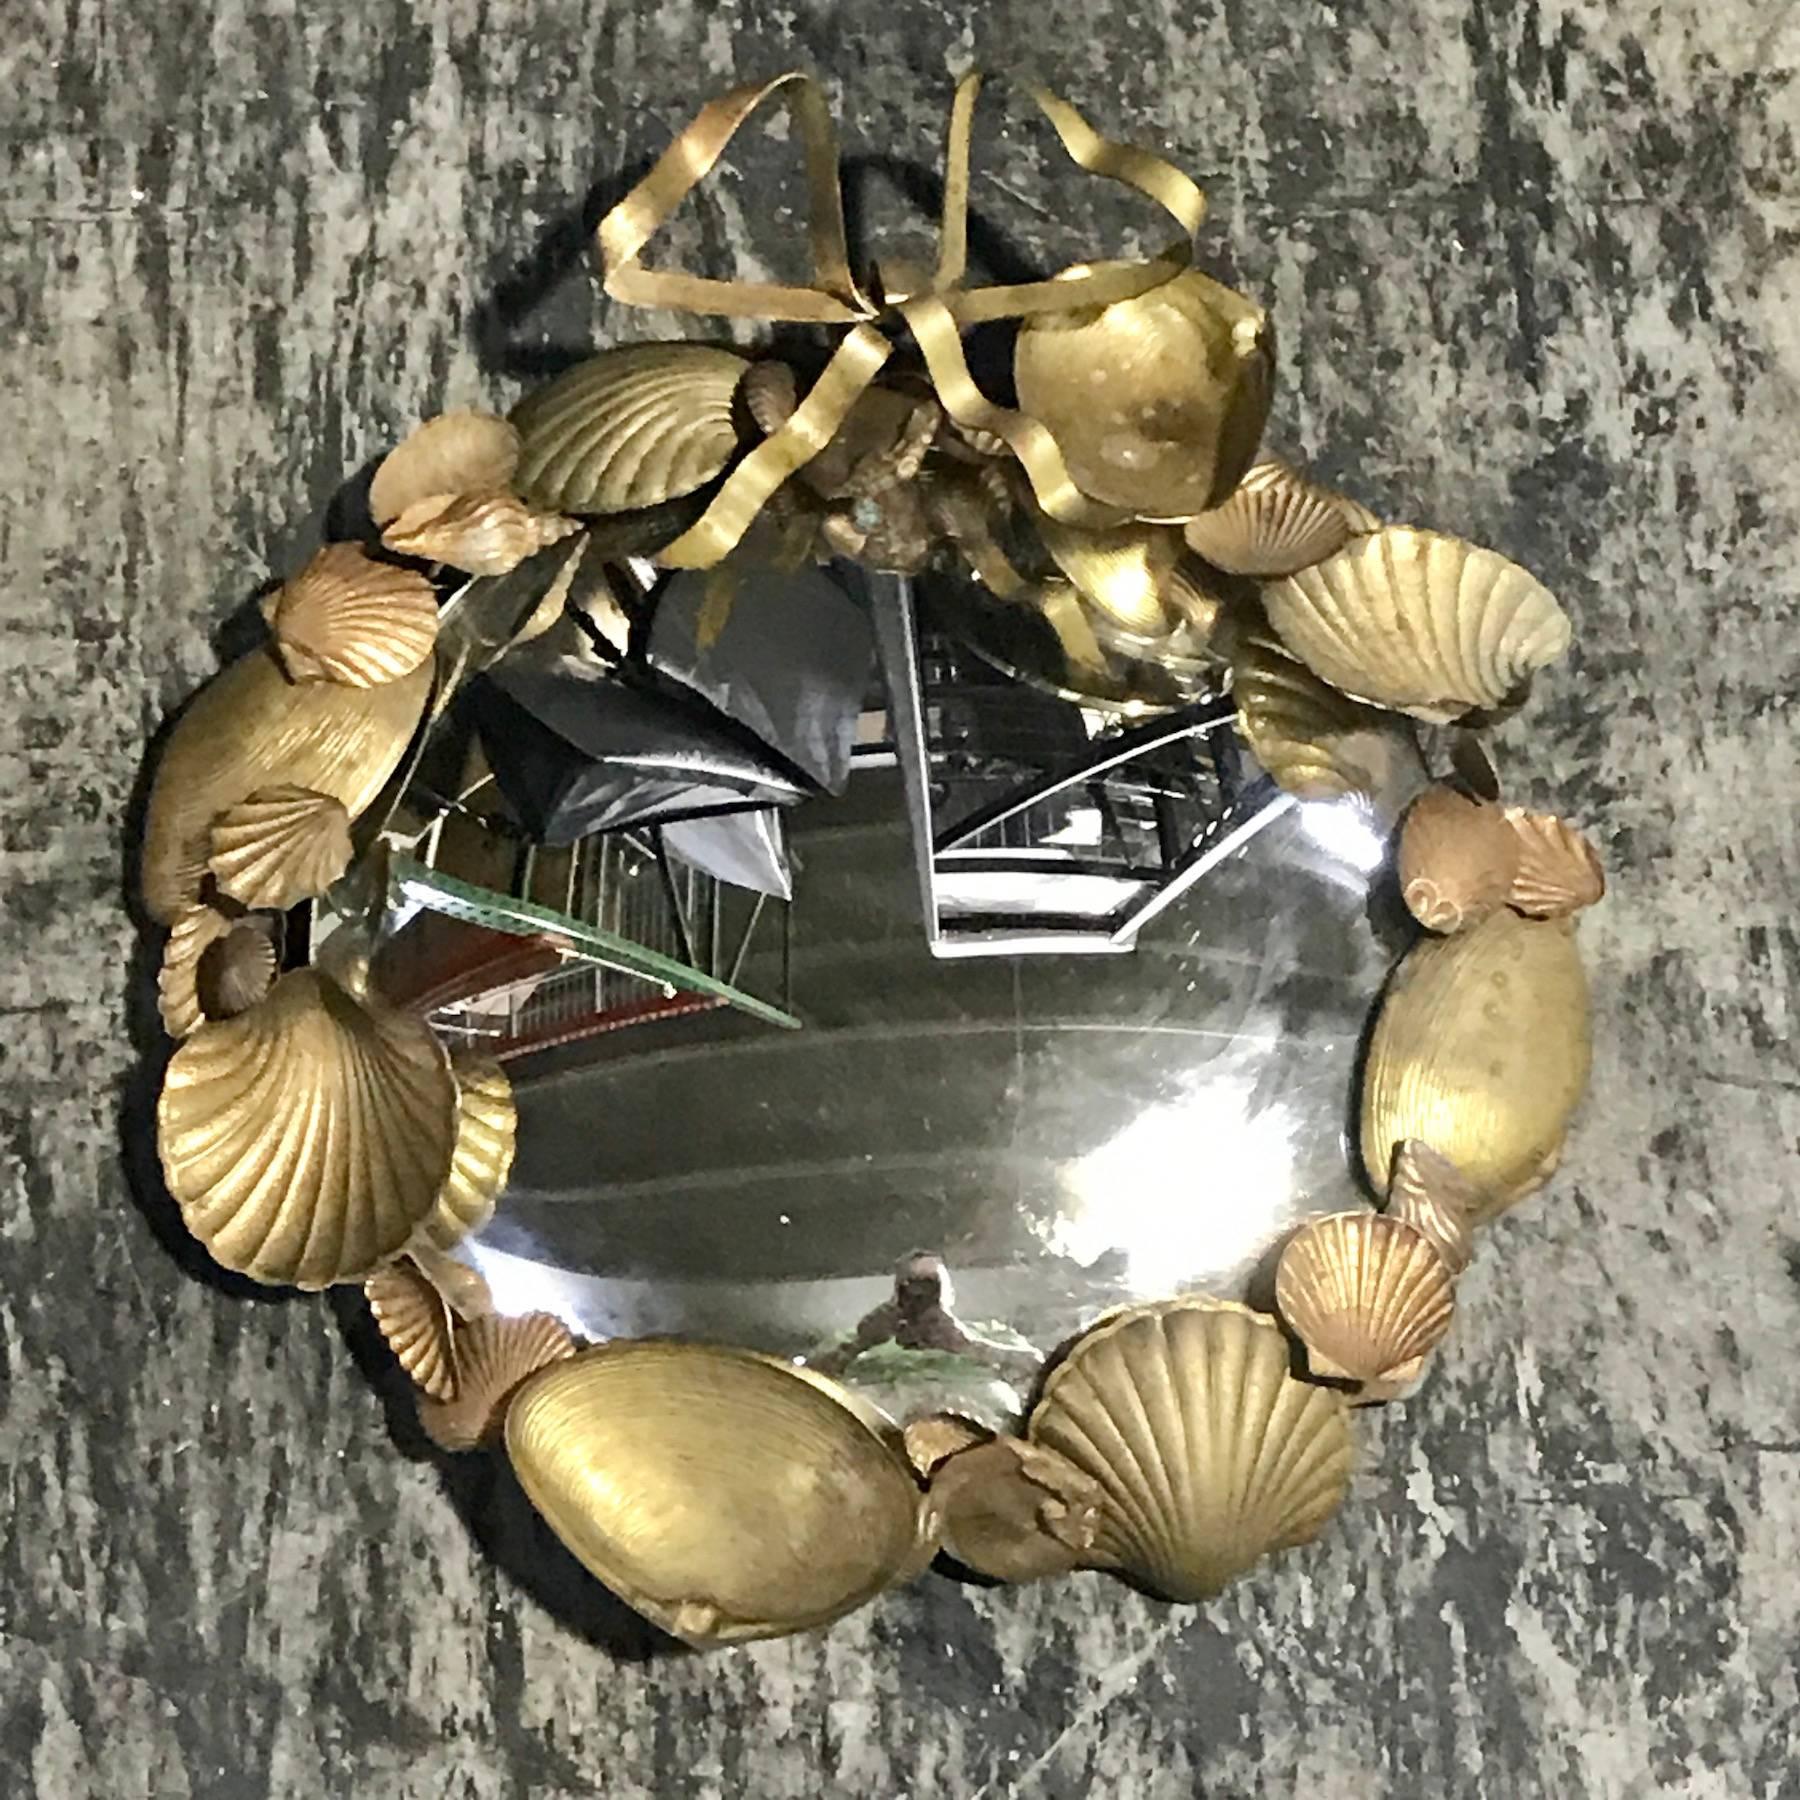 Pair of French brass shell motif convex mirrors, each one with a continuous surround of seashells, holding a 9.5 inch convex mirror, joined with a ribbon atop.
This item is at our Atlanta GA, Location, not Palm Beach.
